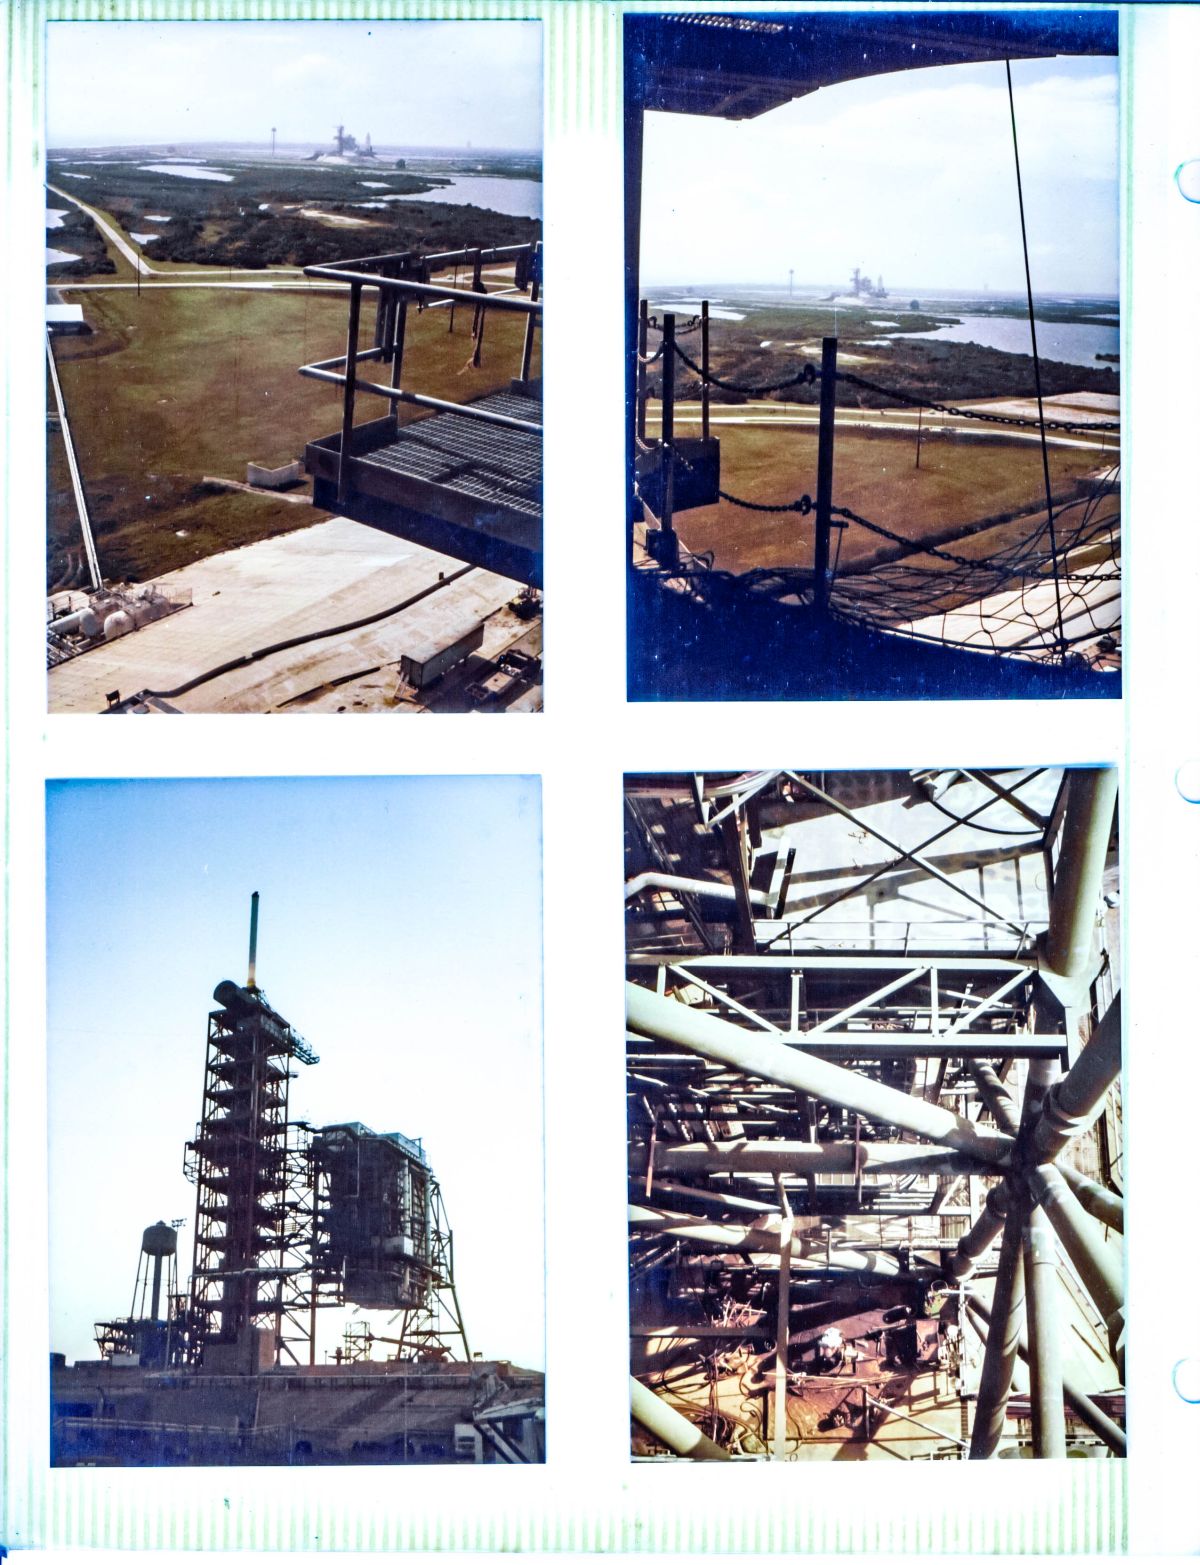 Top: The rollout of Space Shuttle Columbia to Launch Complex 39-A, prior to the launch of STS-2, which was the second mission in the Space Shuttle Program, as seen from the upper elevations of the towers on Launch Complex 39-B. Bottom left: The Rotating Service Structure at Launch Complex 39-B, Kennedy Space Center, Florida, silhouetted by the first light of dawn, spanning the Flame Trench in the ‘Mated’ position. Bottom right: Looking down from the upper reaches of the RSS as it was being constructed, with a workman bent over his work, far below you.